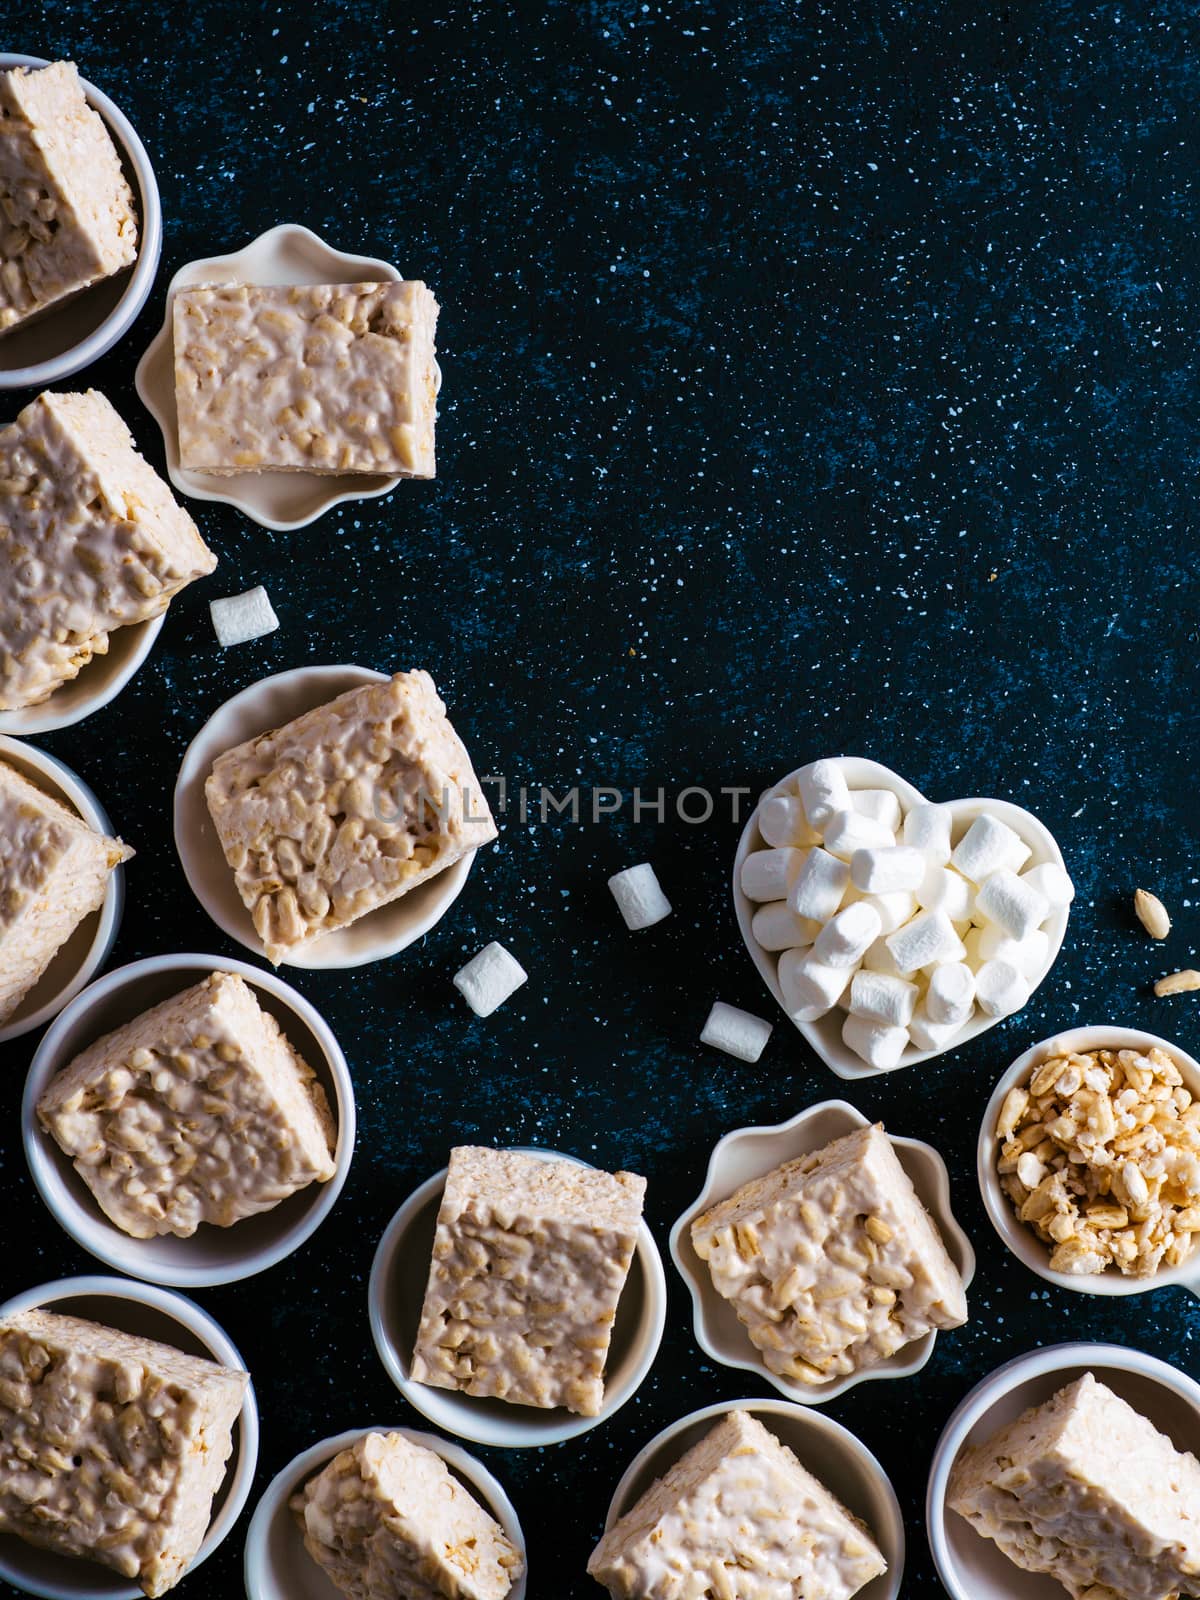 Homemade bars of Marshmallow and crispy rice by fascinadora